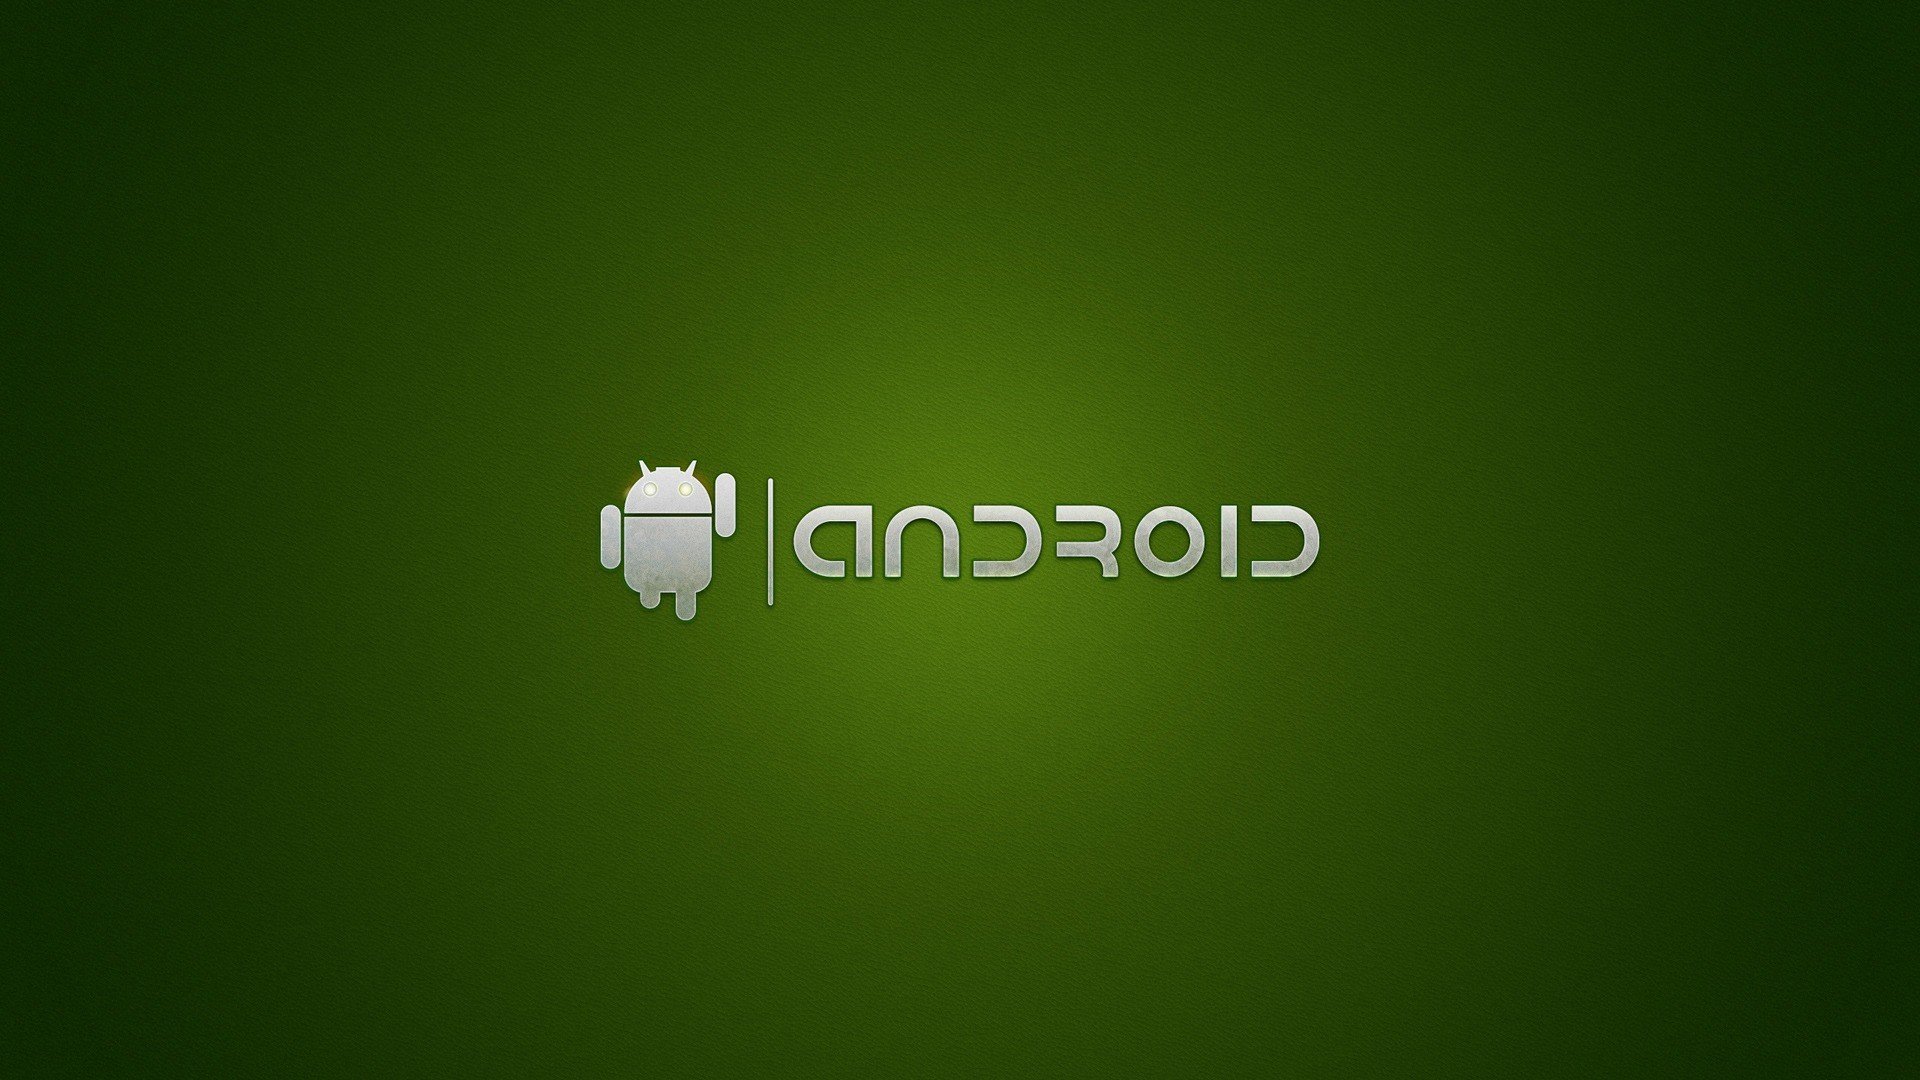 Android (operating system), Smartphone, Operating systems, Technology, Simple background, Google Wallpaper